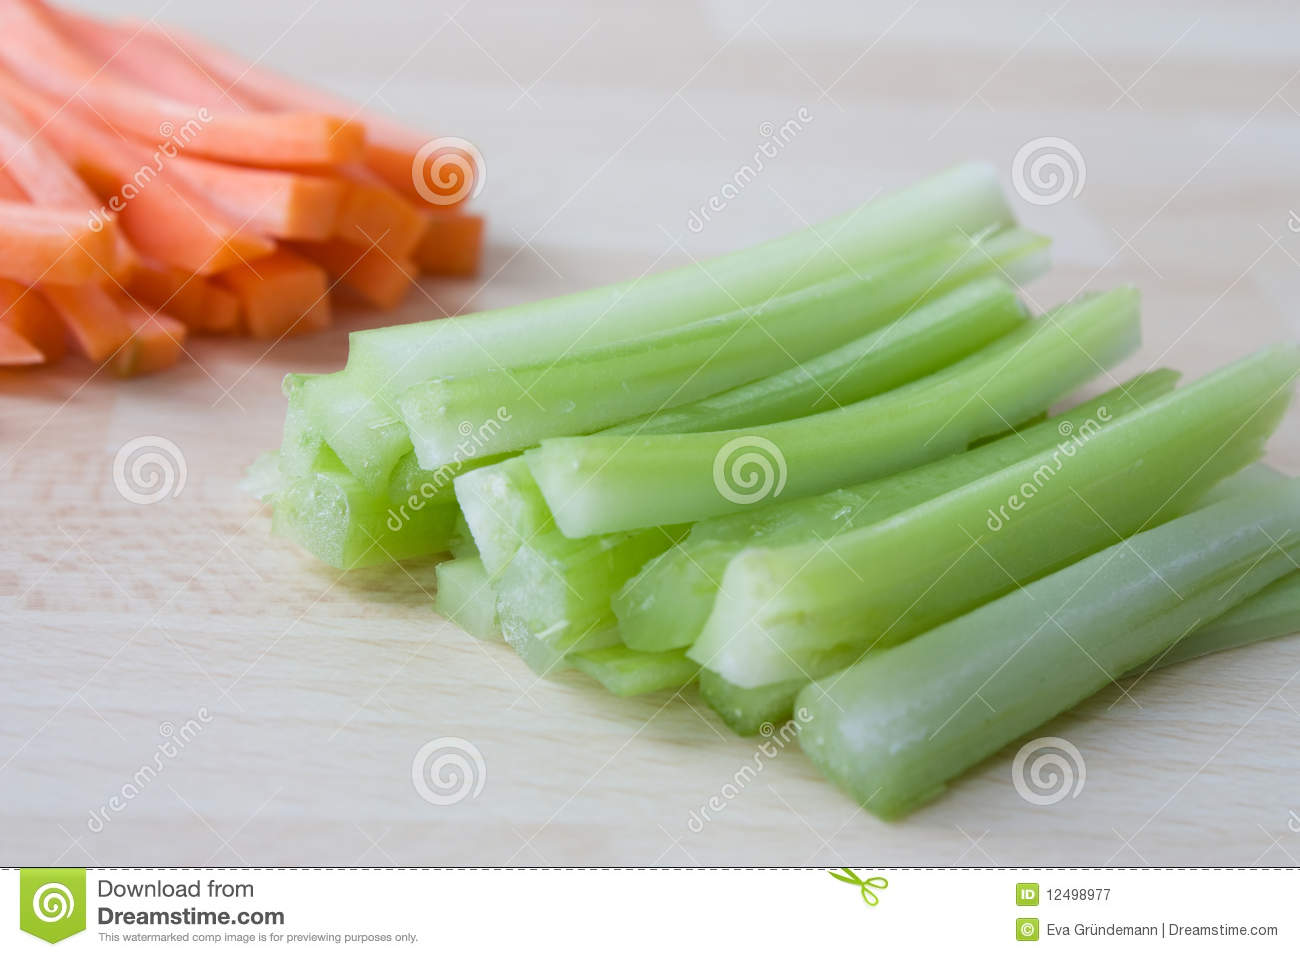 Selective Focus Image Of Sliced Celery With Carrots In The Background